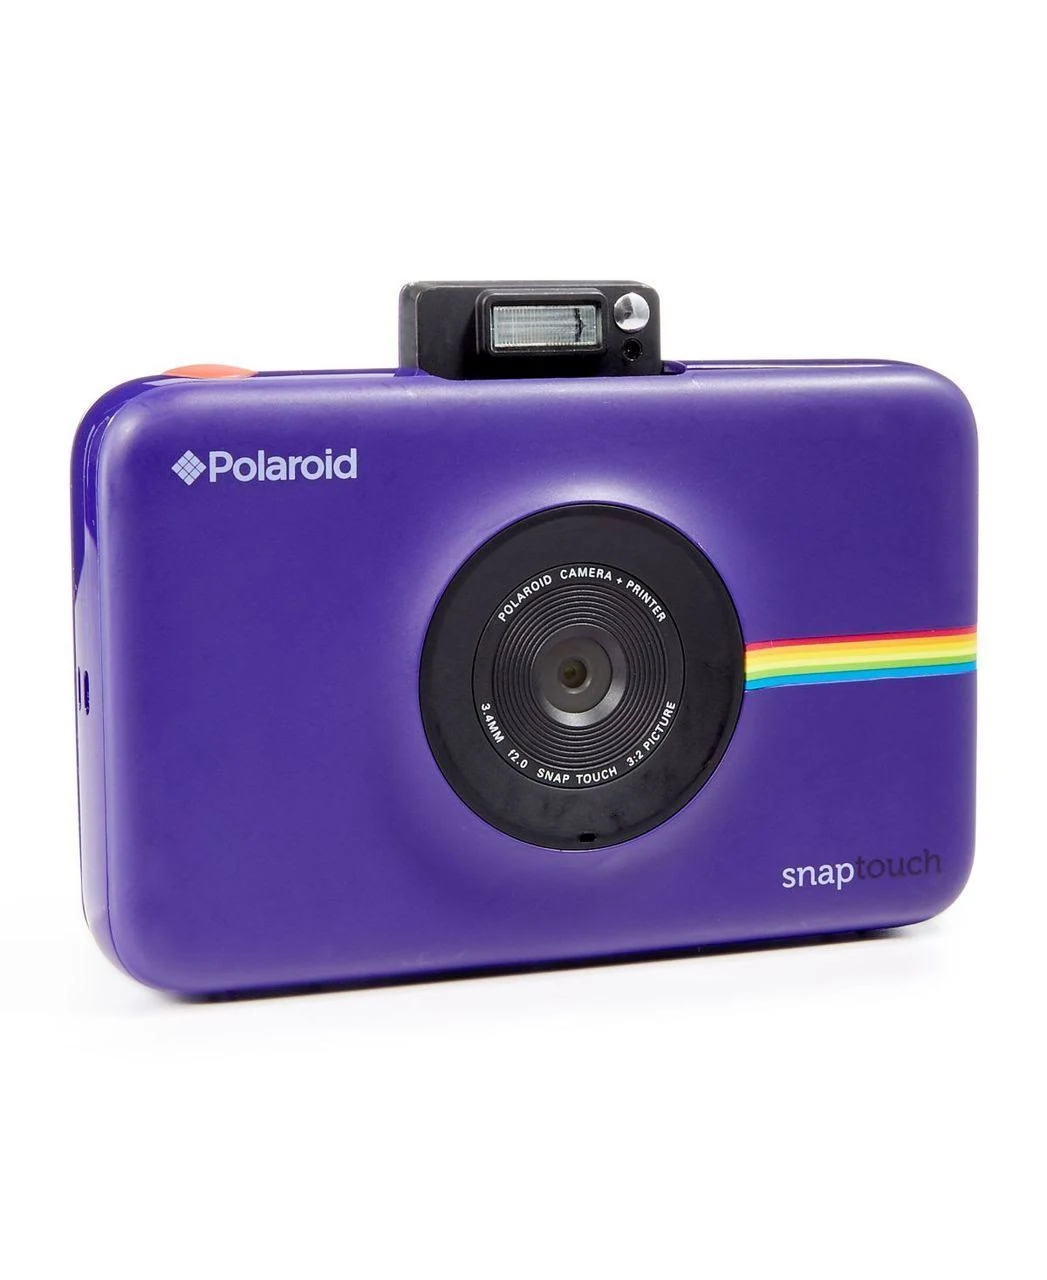 Polaroid Snap Touch Instant Print Digital Camera With LCD Display (Purple) with Zink Zero Ink Printing Technology